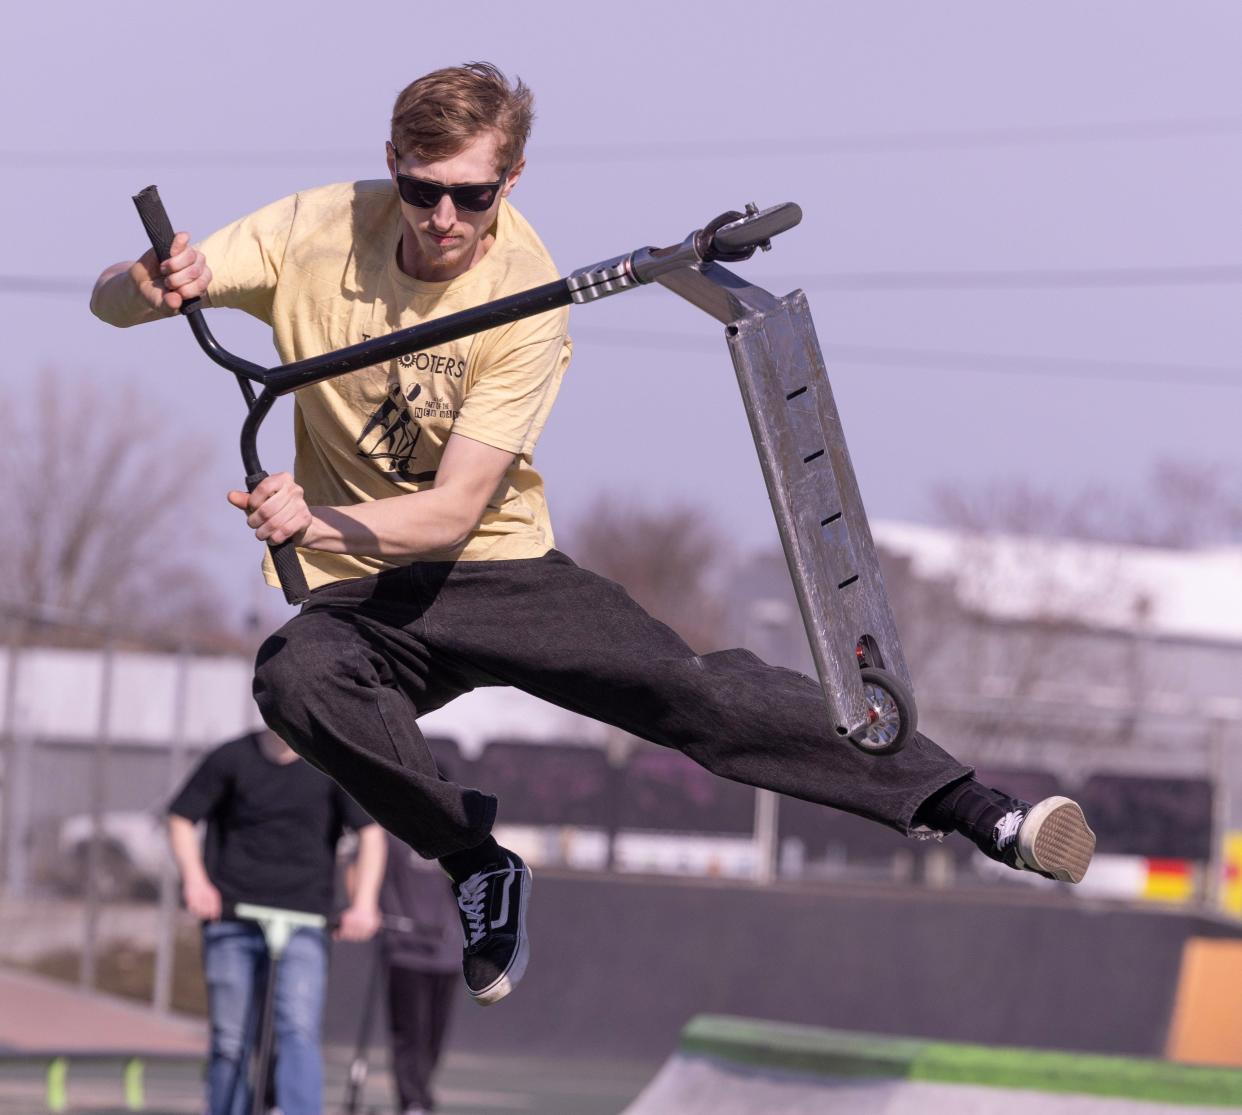 Drew Whittington of Cleveland does a bri flip on his scooter at the 9th Street DIY skate park in Canton.